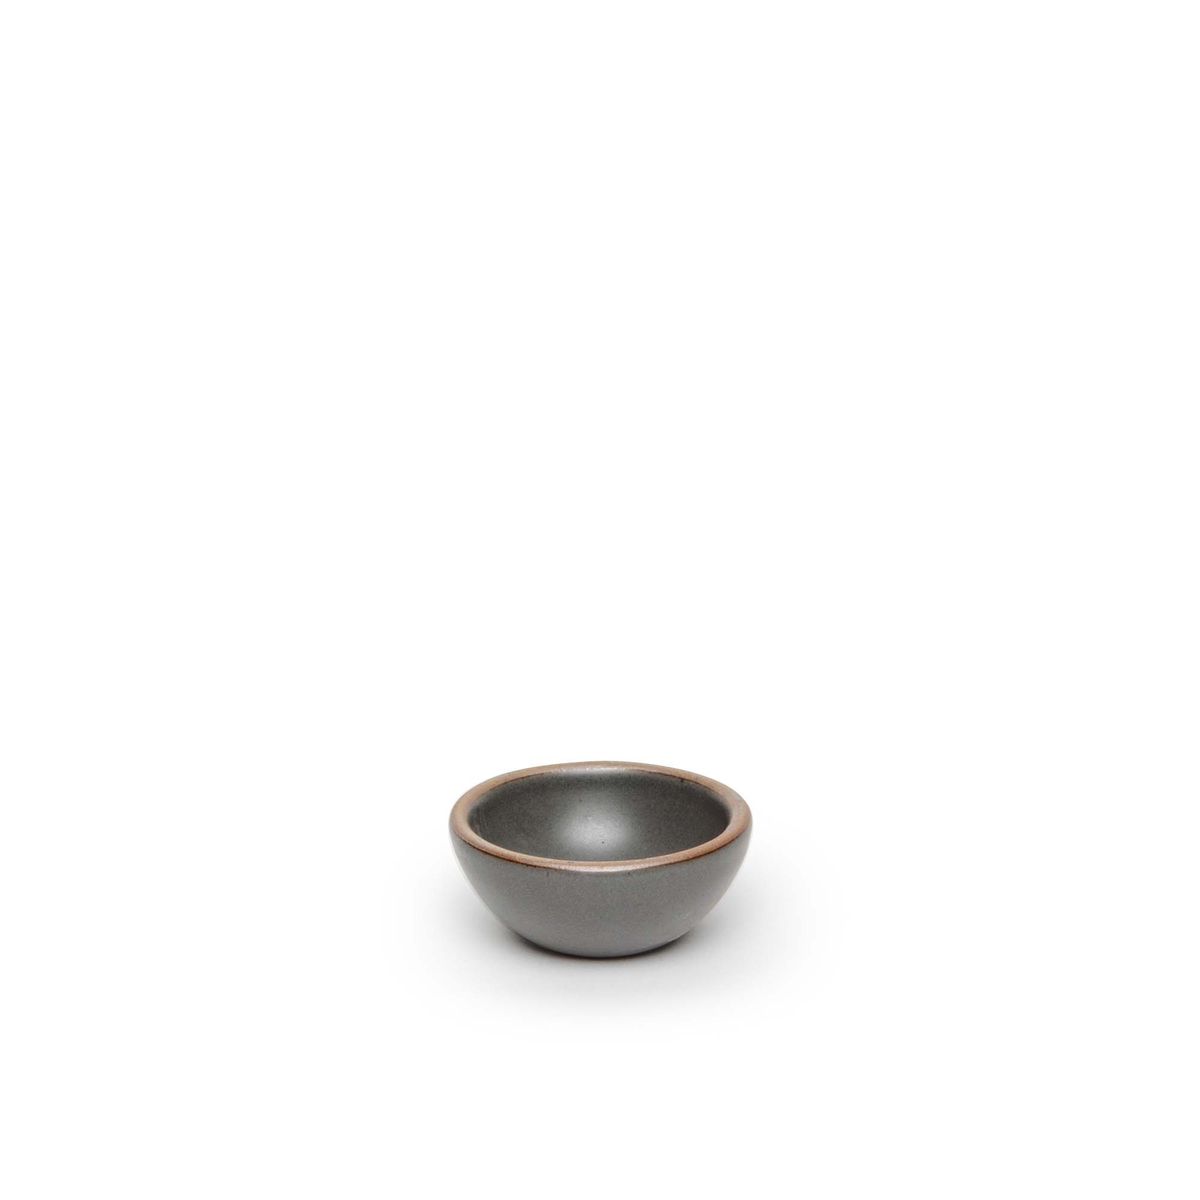 A tiny rounded ceramic bowl in a cool, medium grey color featuring iron speckles and an unglazed rim